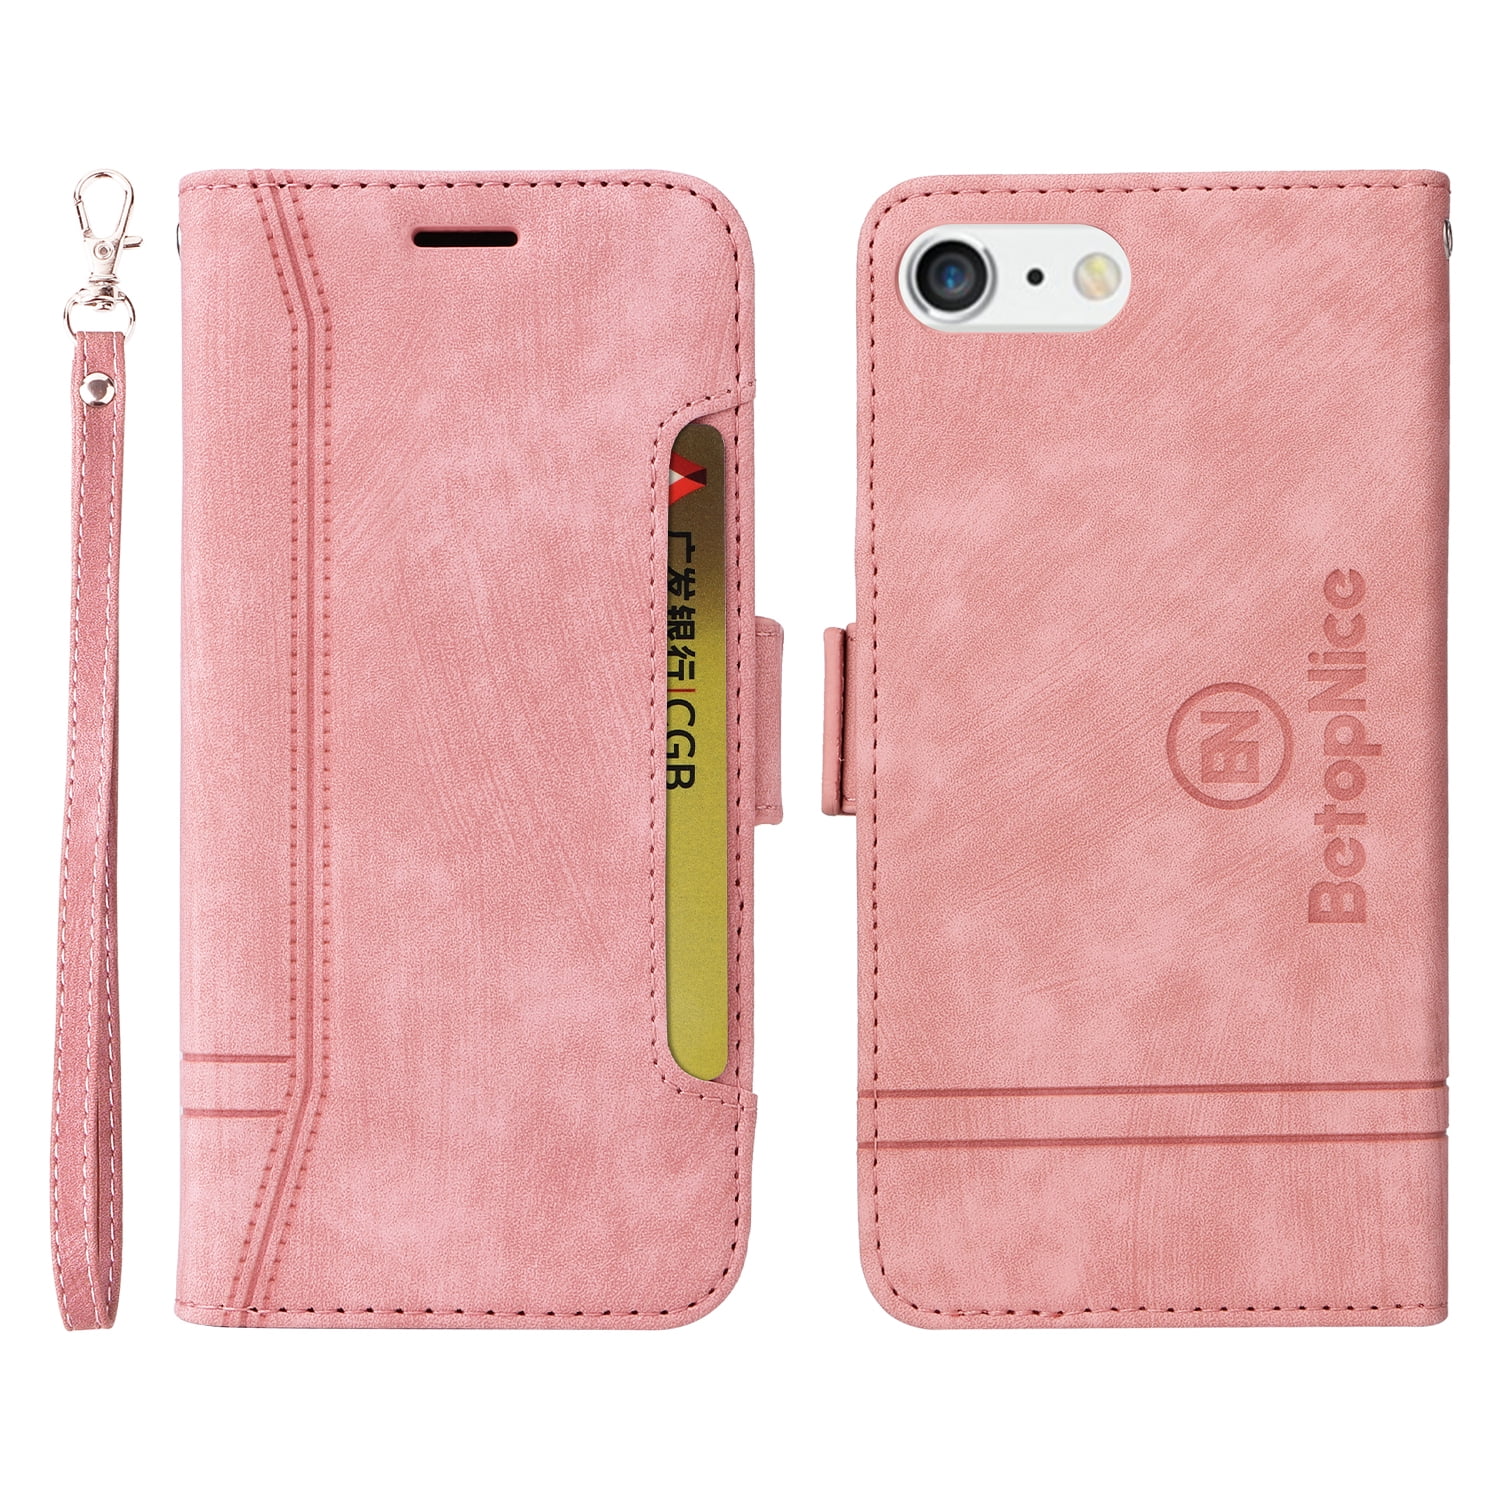 K-Lion Case iPhone 7 Plus/iPhone Plus,Shockproof Magnetic Clasp Folio Flip Kickstand ID Credit Card Slots Holder PU Leather Wallet Phone Cover with Wrist Strap,Pink - Walmart.com